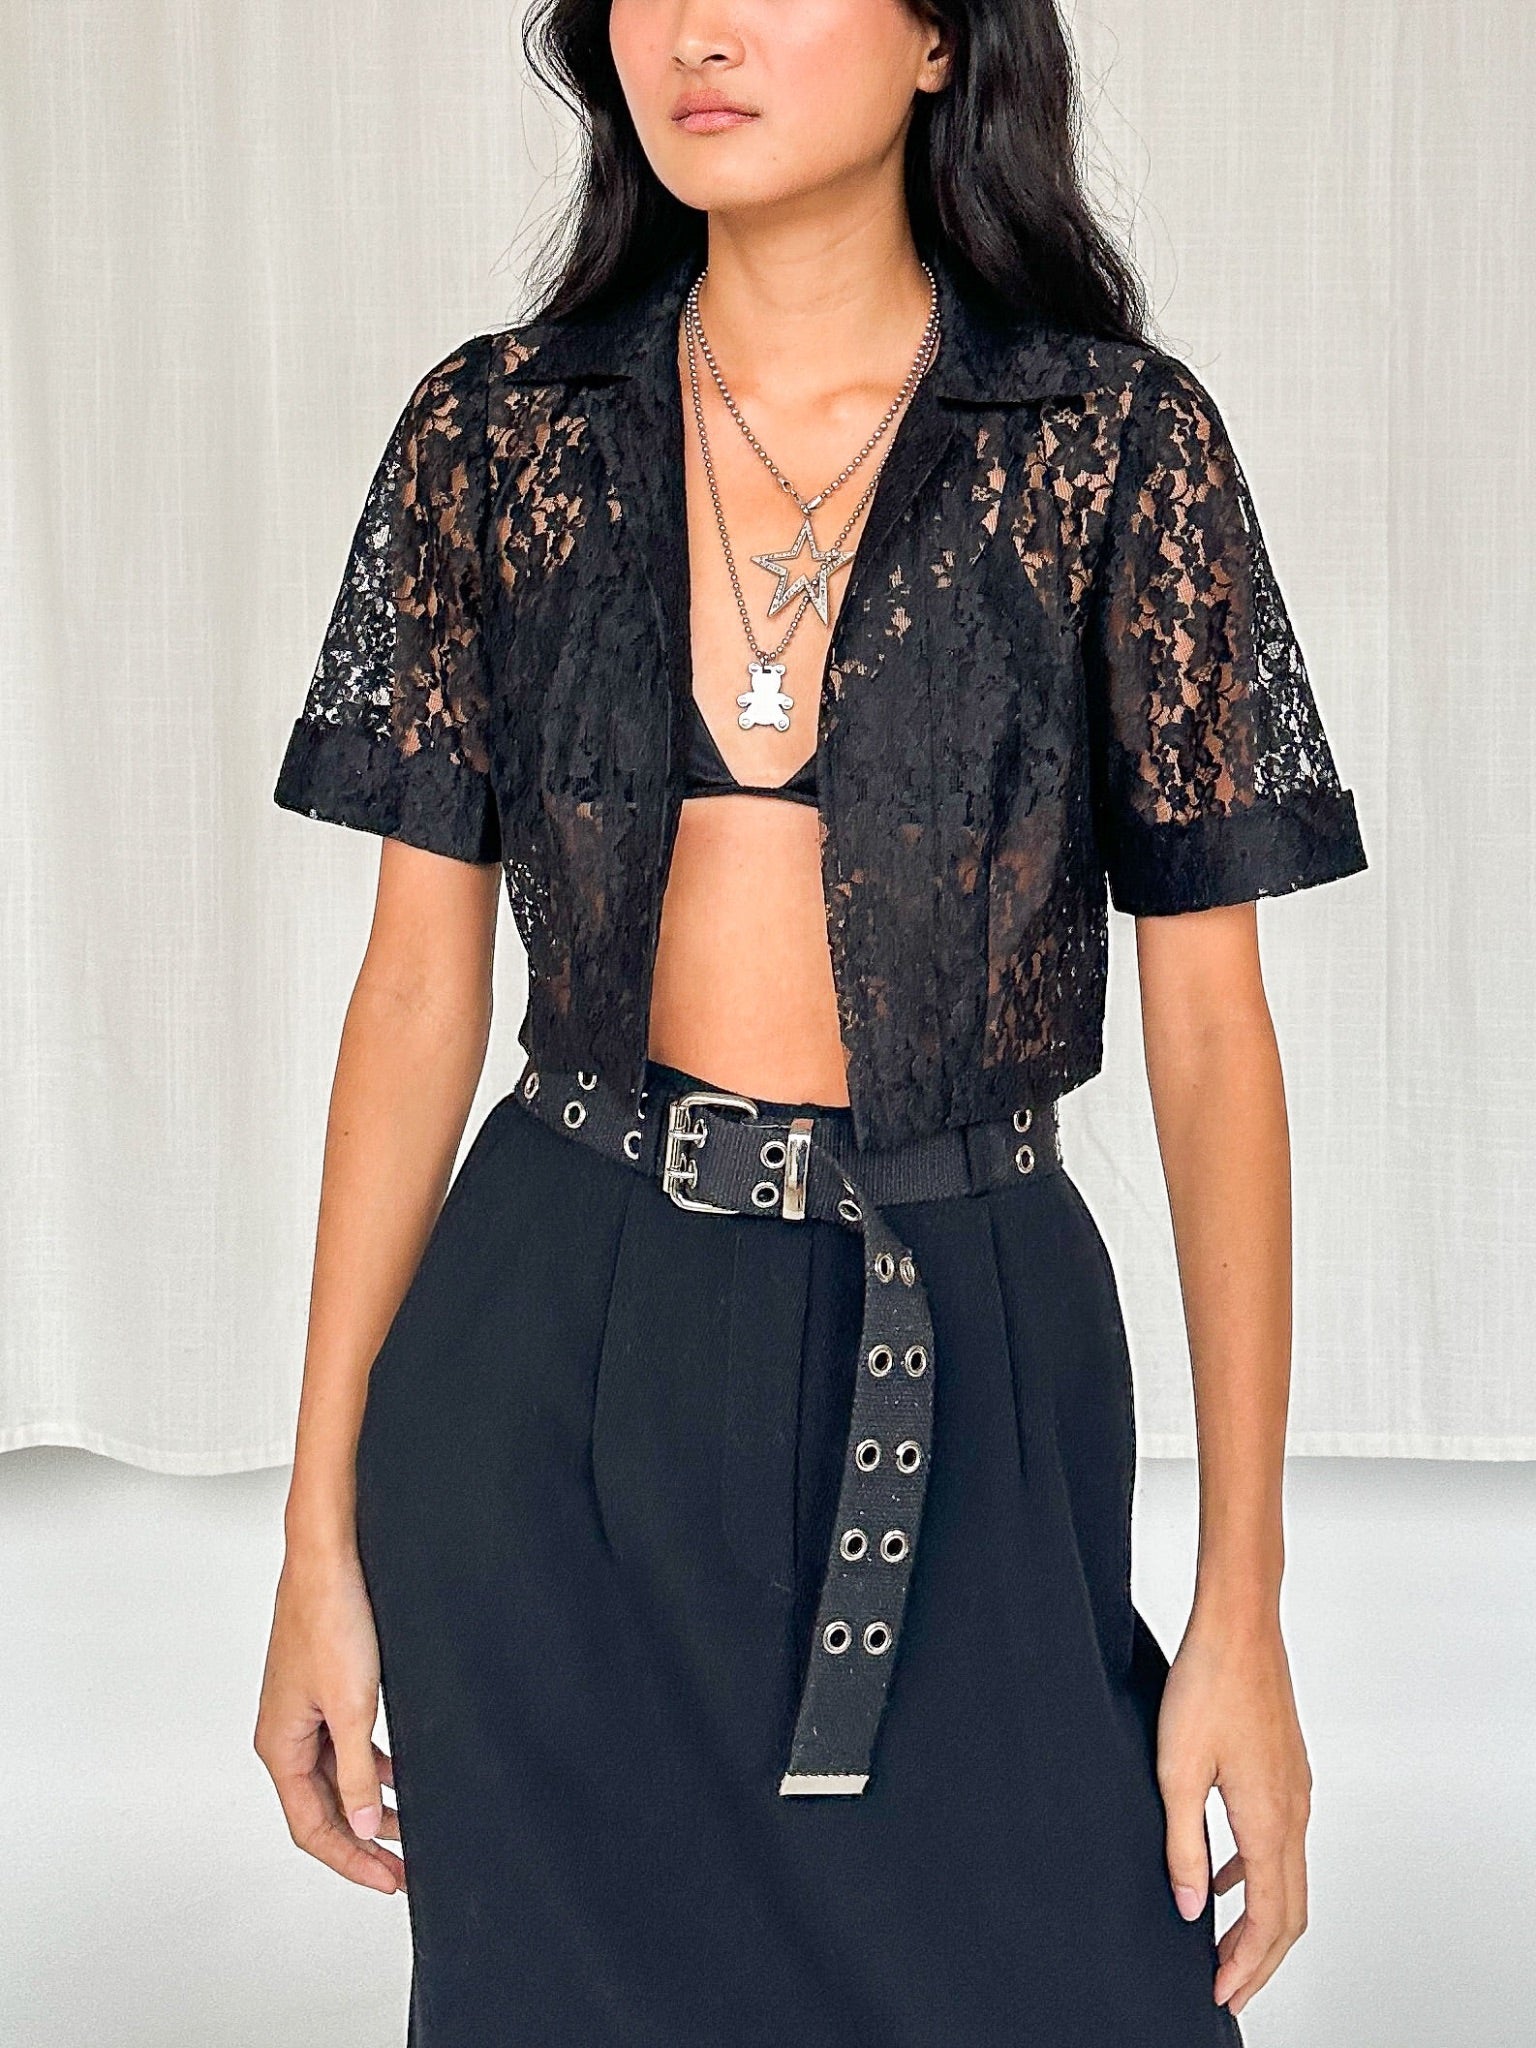 Black Sheer Lace Cropped Cardigan (S) - 1